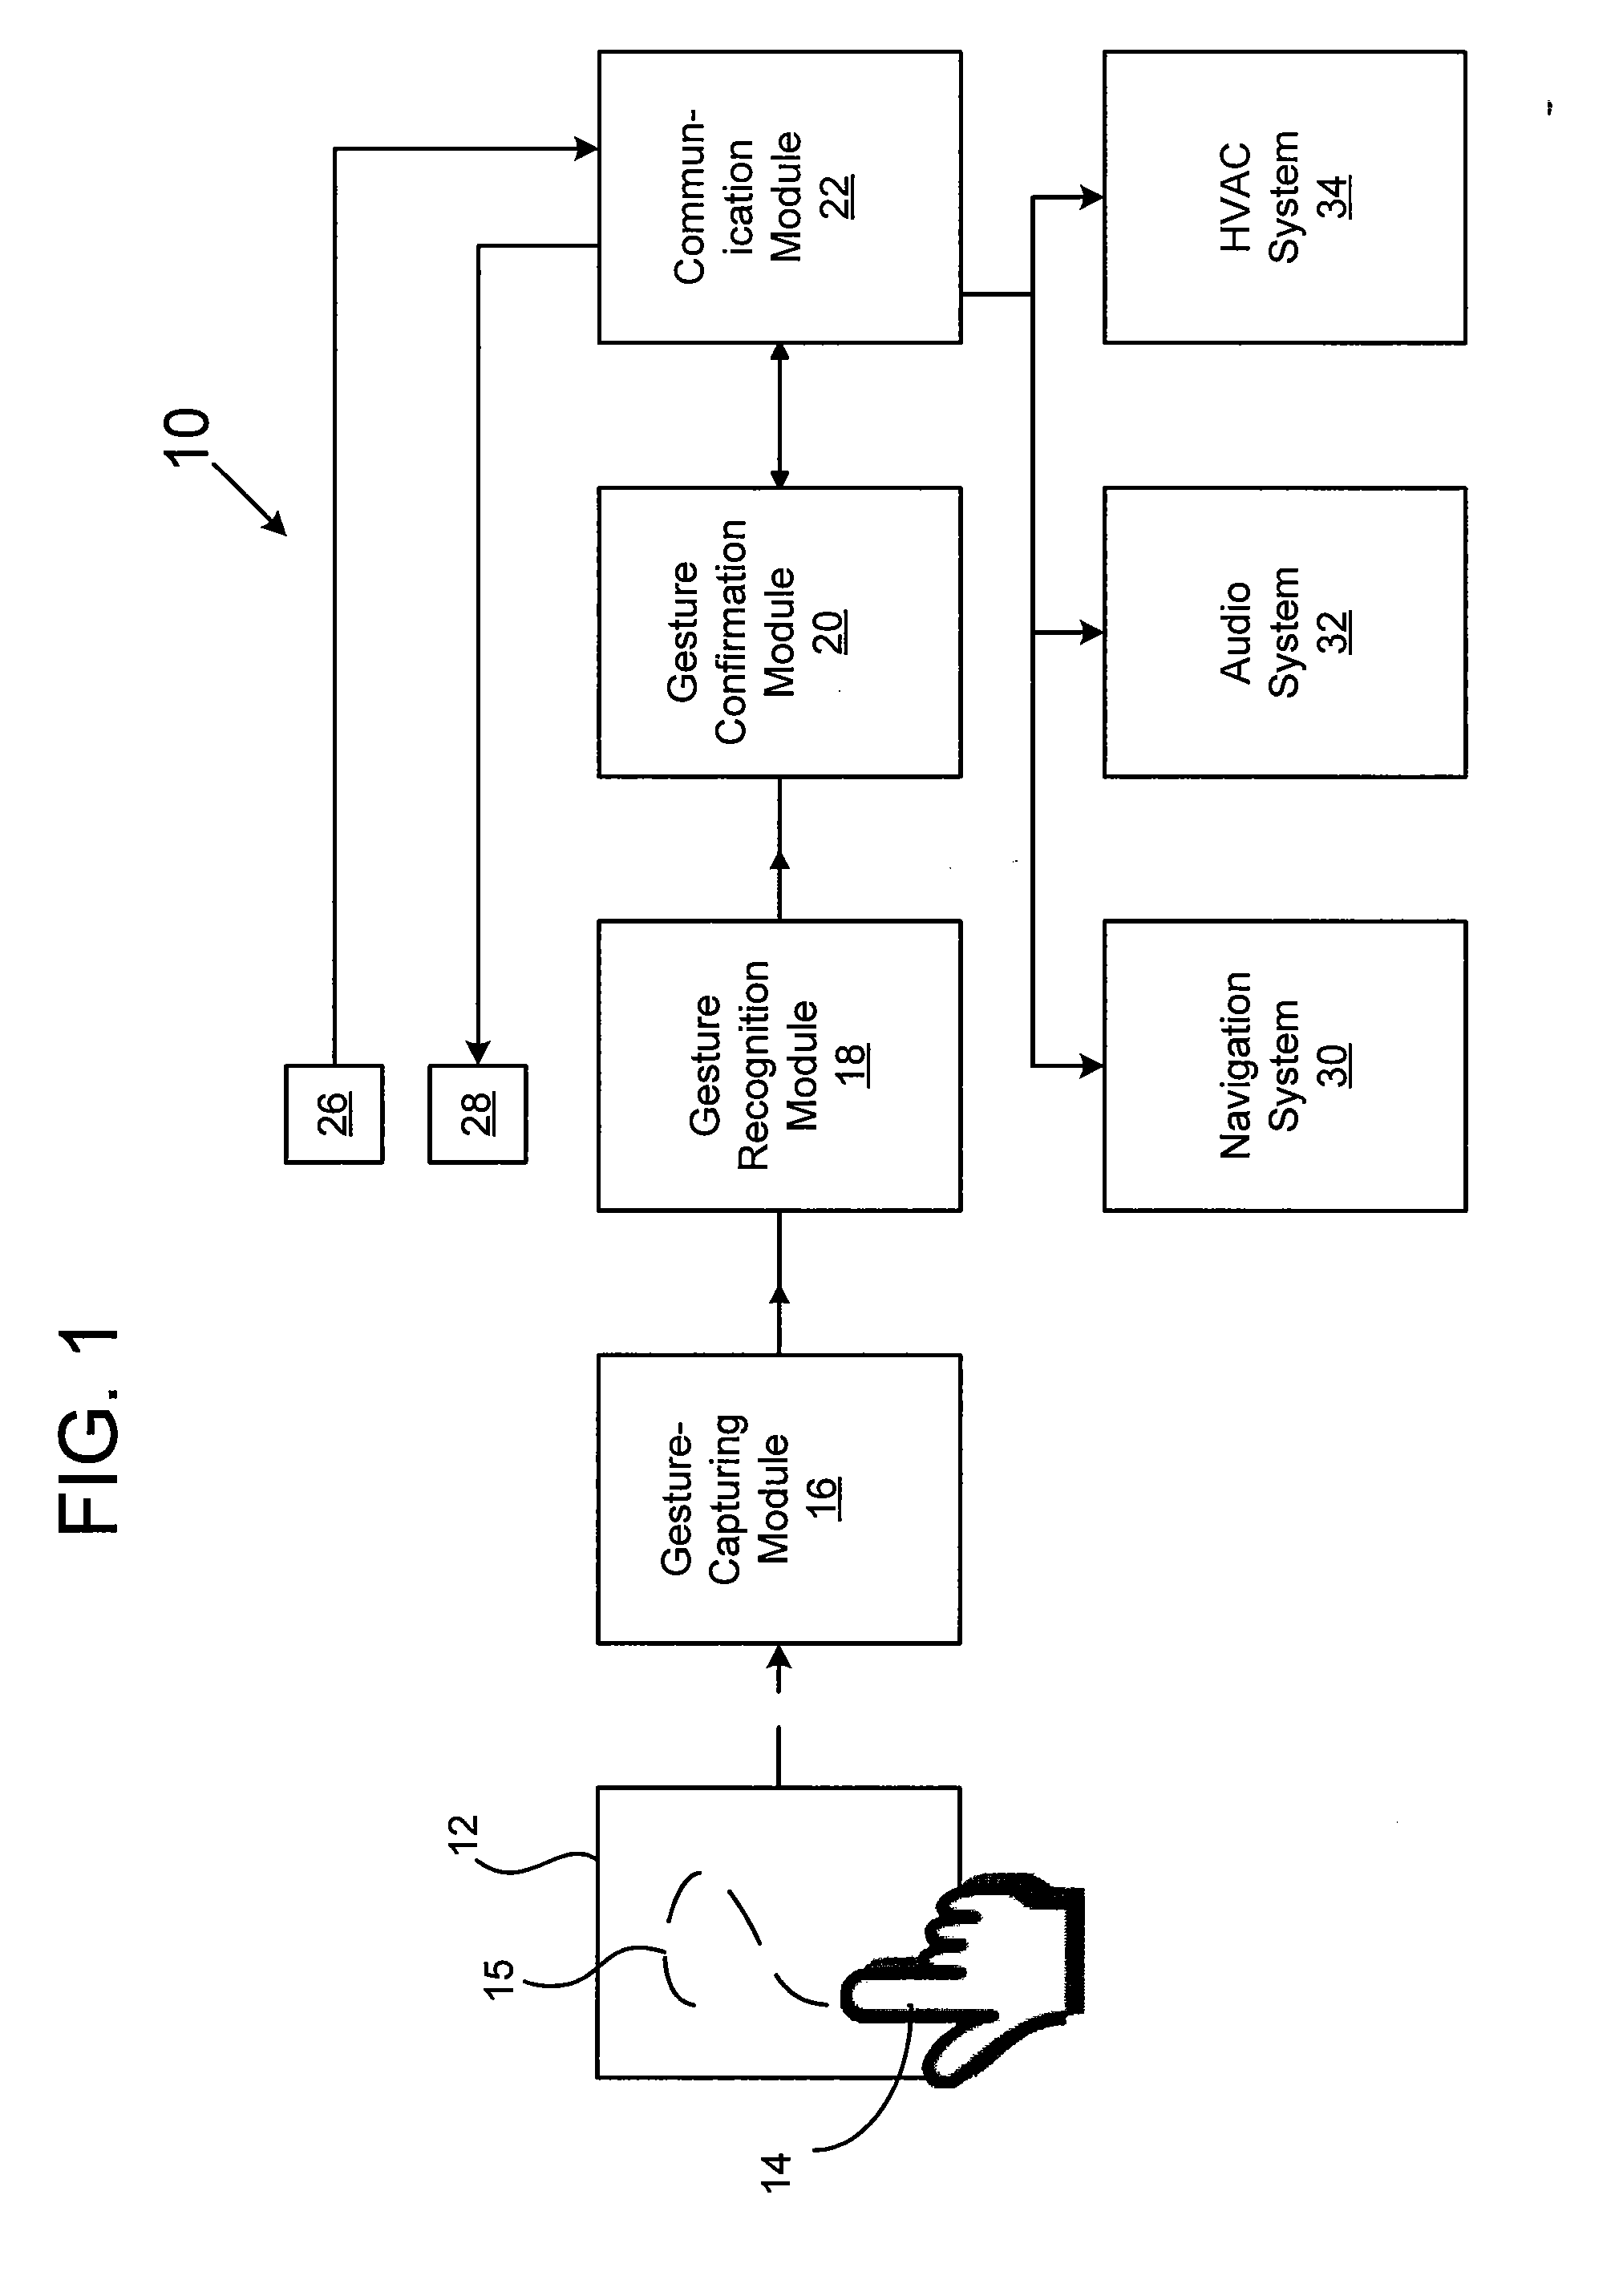 Method of Fusing Multiple Information Sources in Image-based Gesture Recognition System